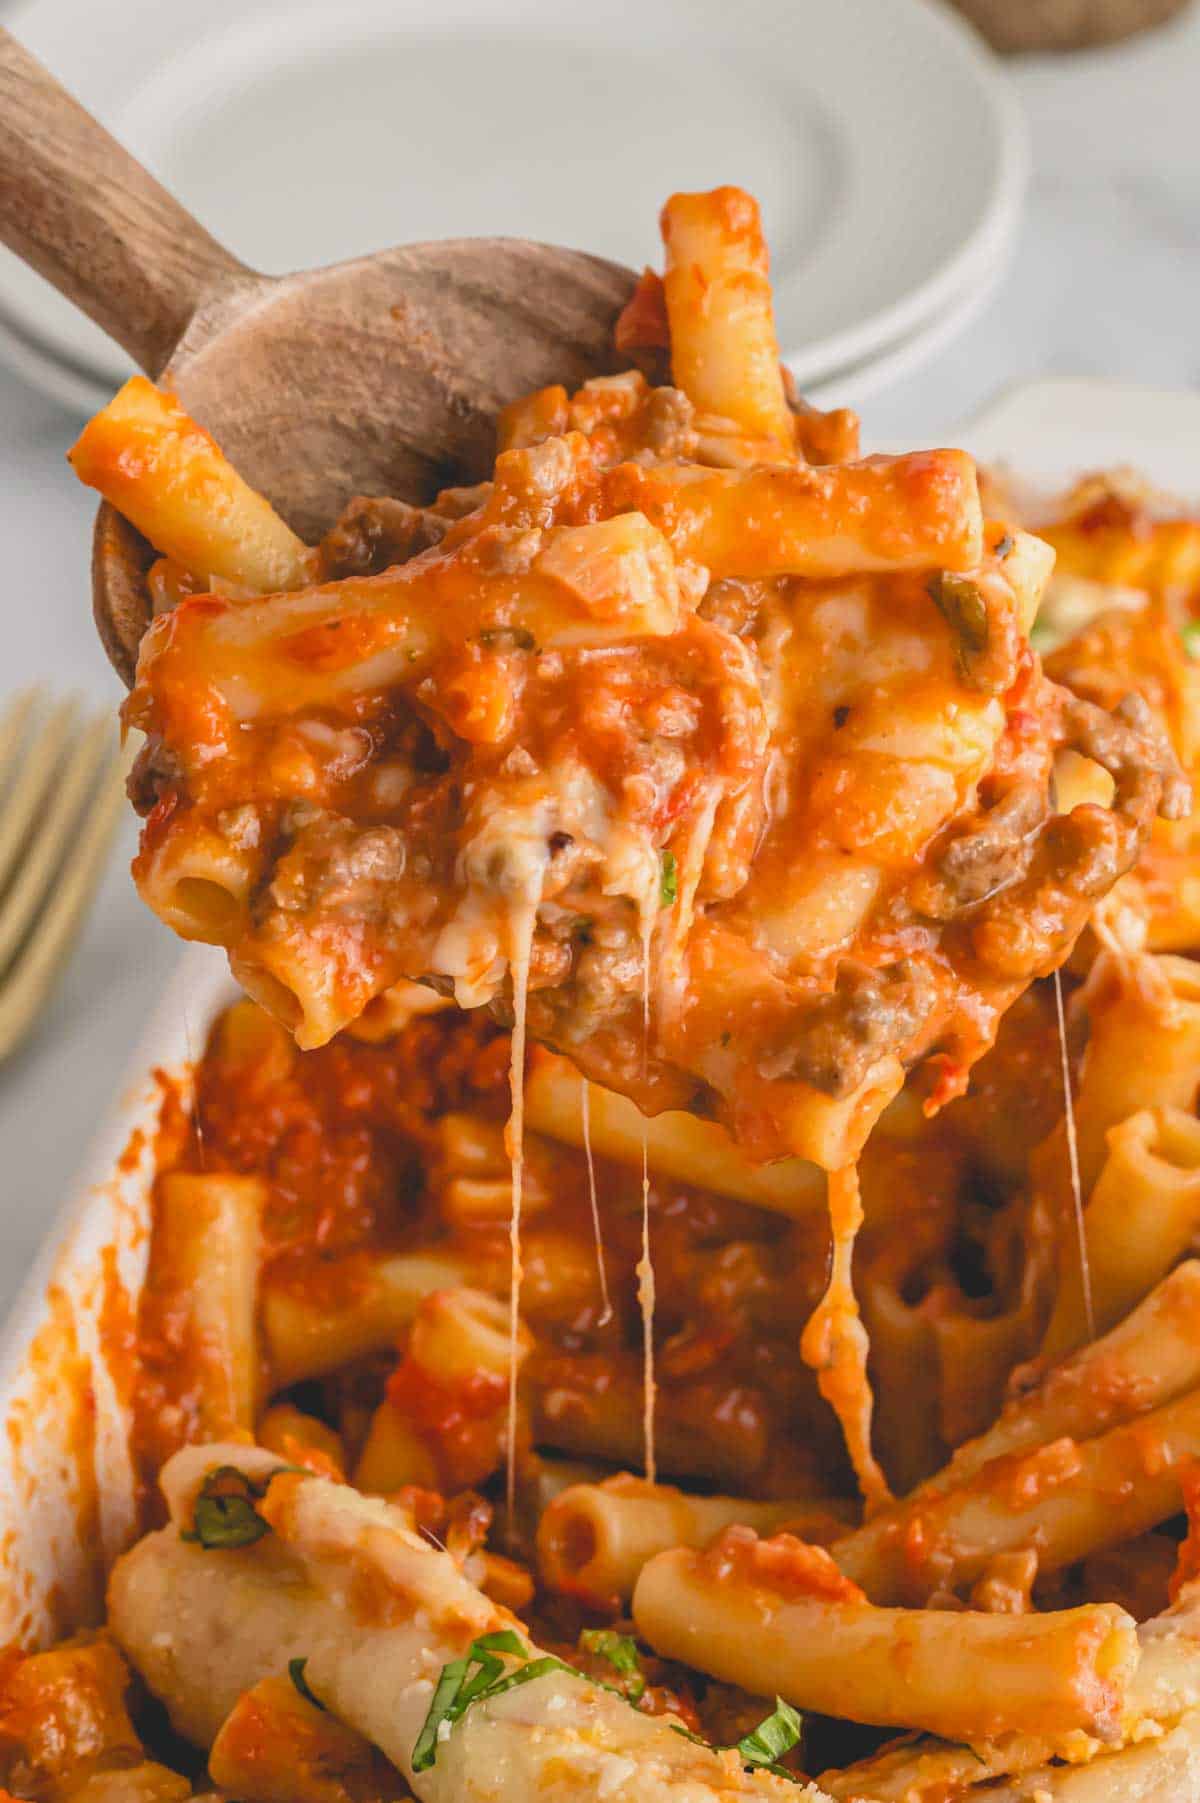 A wooden spoon scooping up a bite of easy baked ziti with sausage.